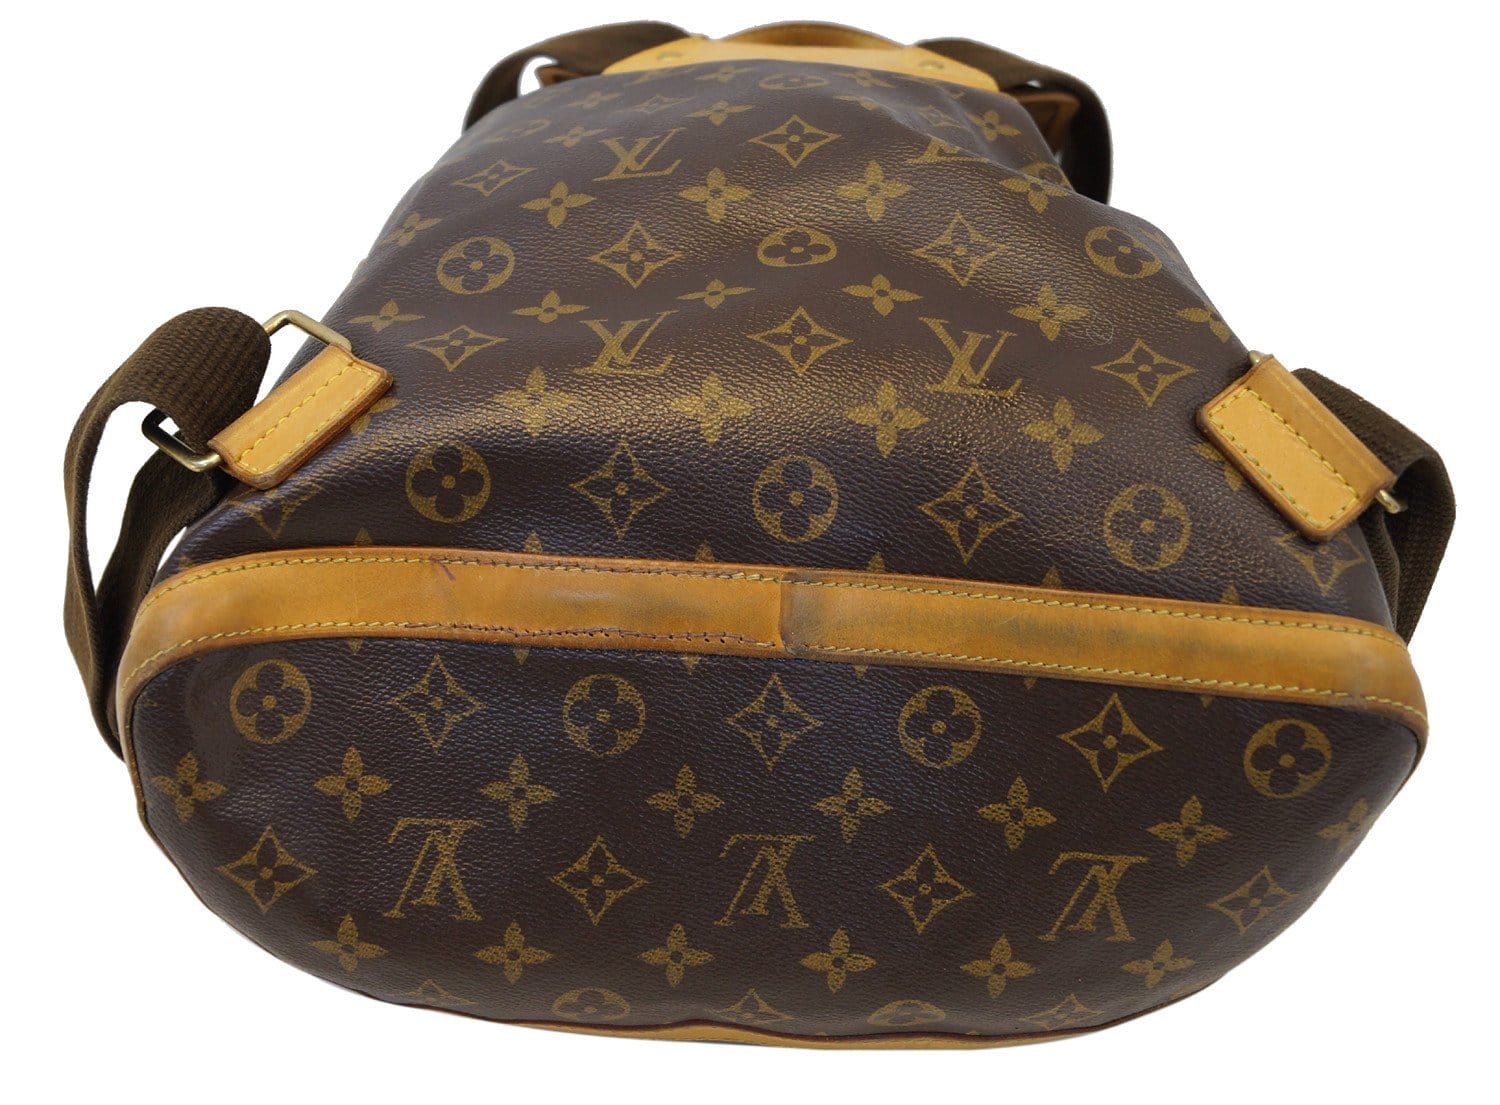 Louis Vuitton 2001 pre-owned monogram Sac a Dos Bosphore backpack